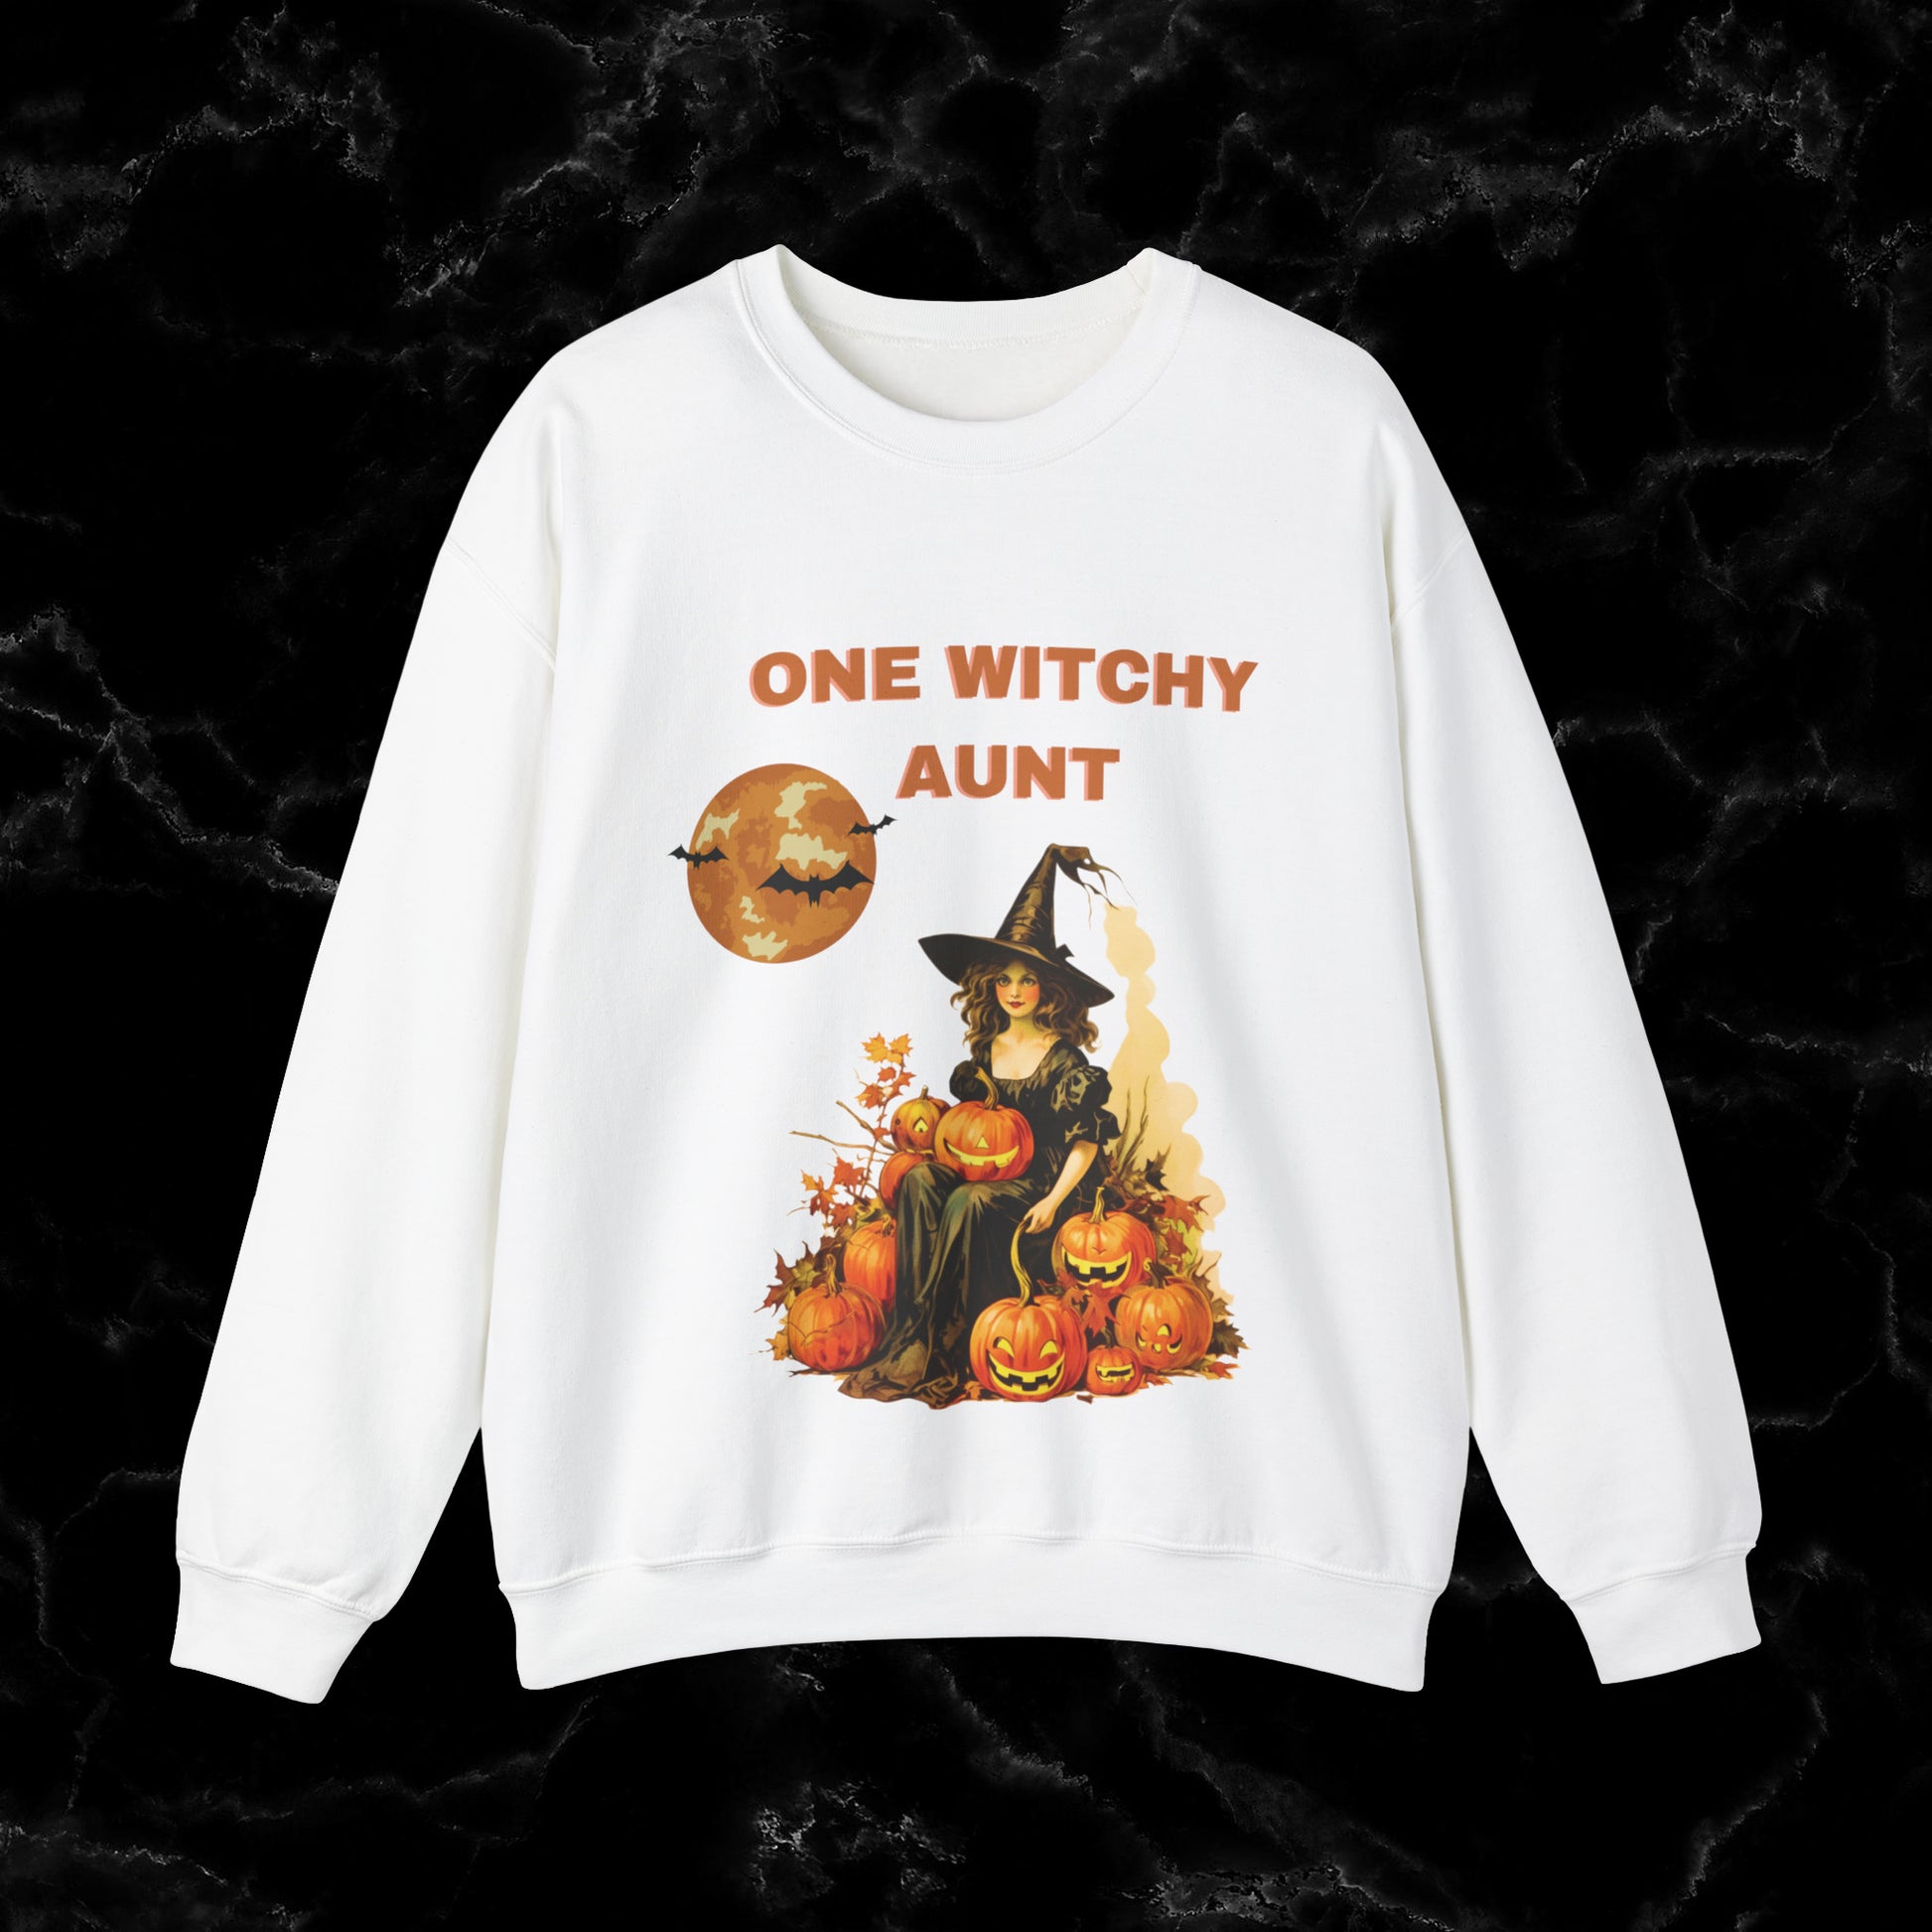 One Witchy Aunt Sweatshirt - Cool Aunt Shirt, Feral Aunt Sweatshirt, Perfect Gifts for Aunts Halloween Sweatshirt S White 